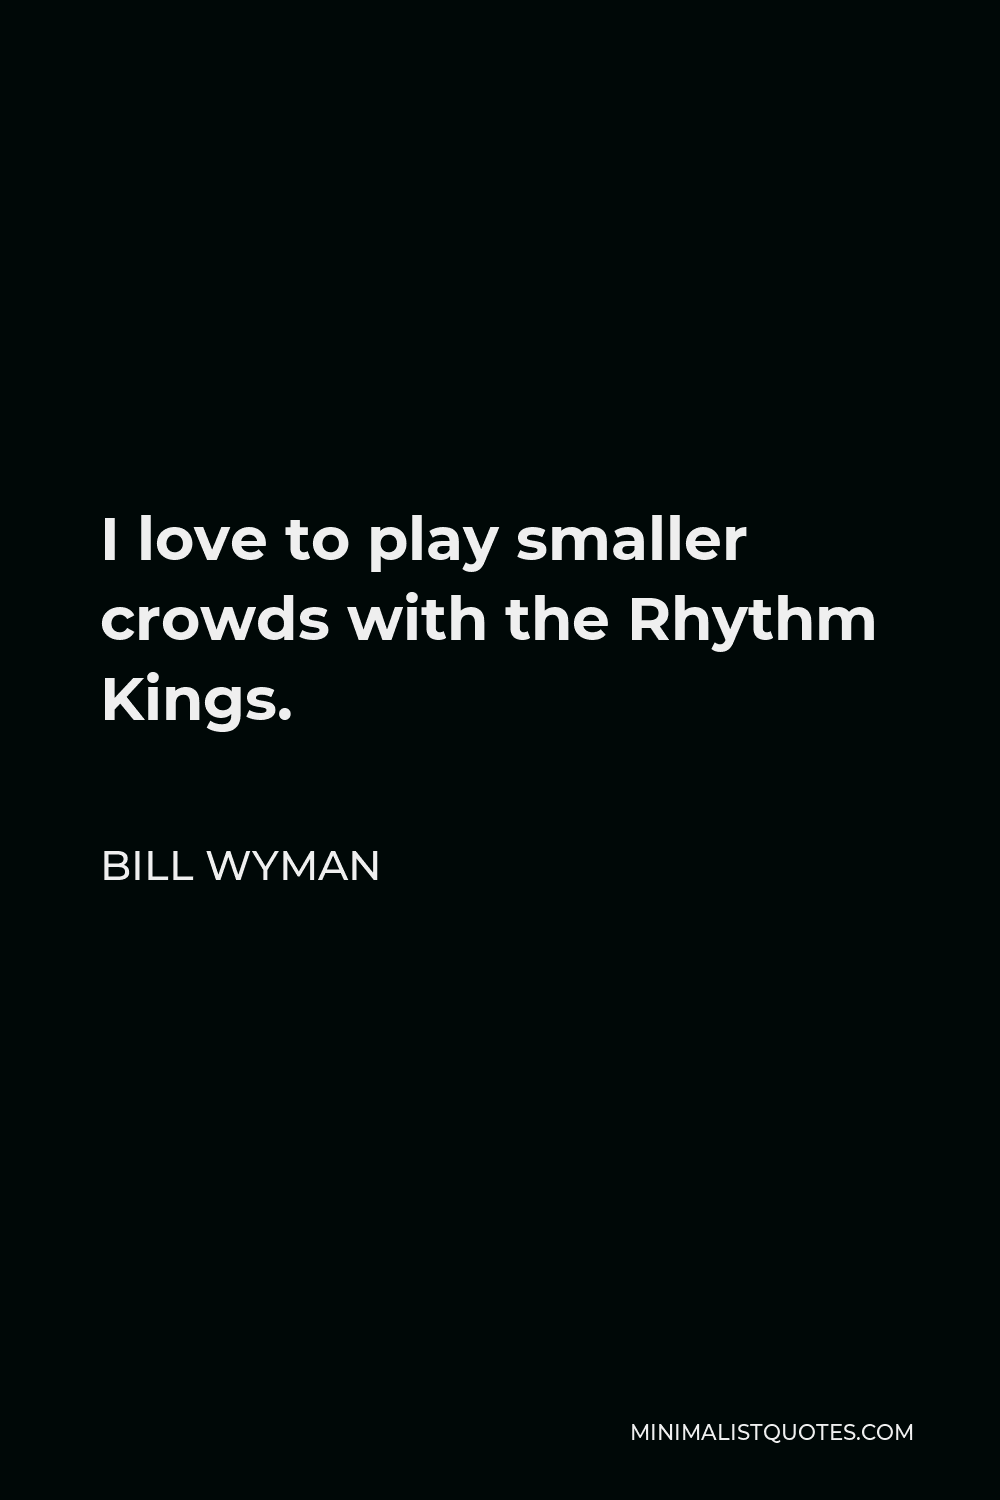 Bill Wyman Quote - I love to play smaller crowds with the Rhythm Kings.